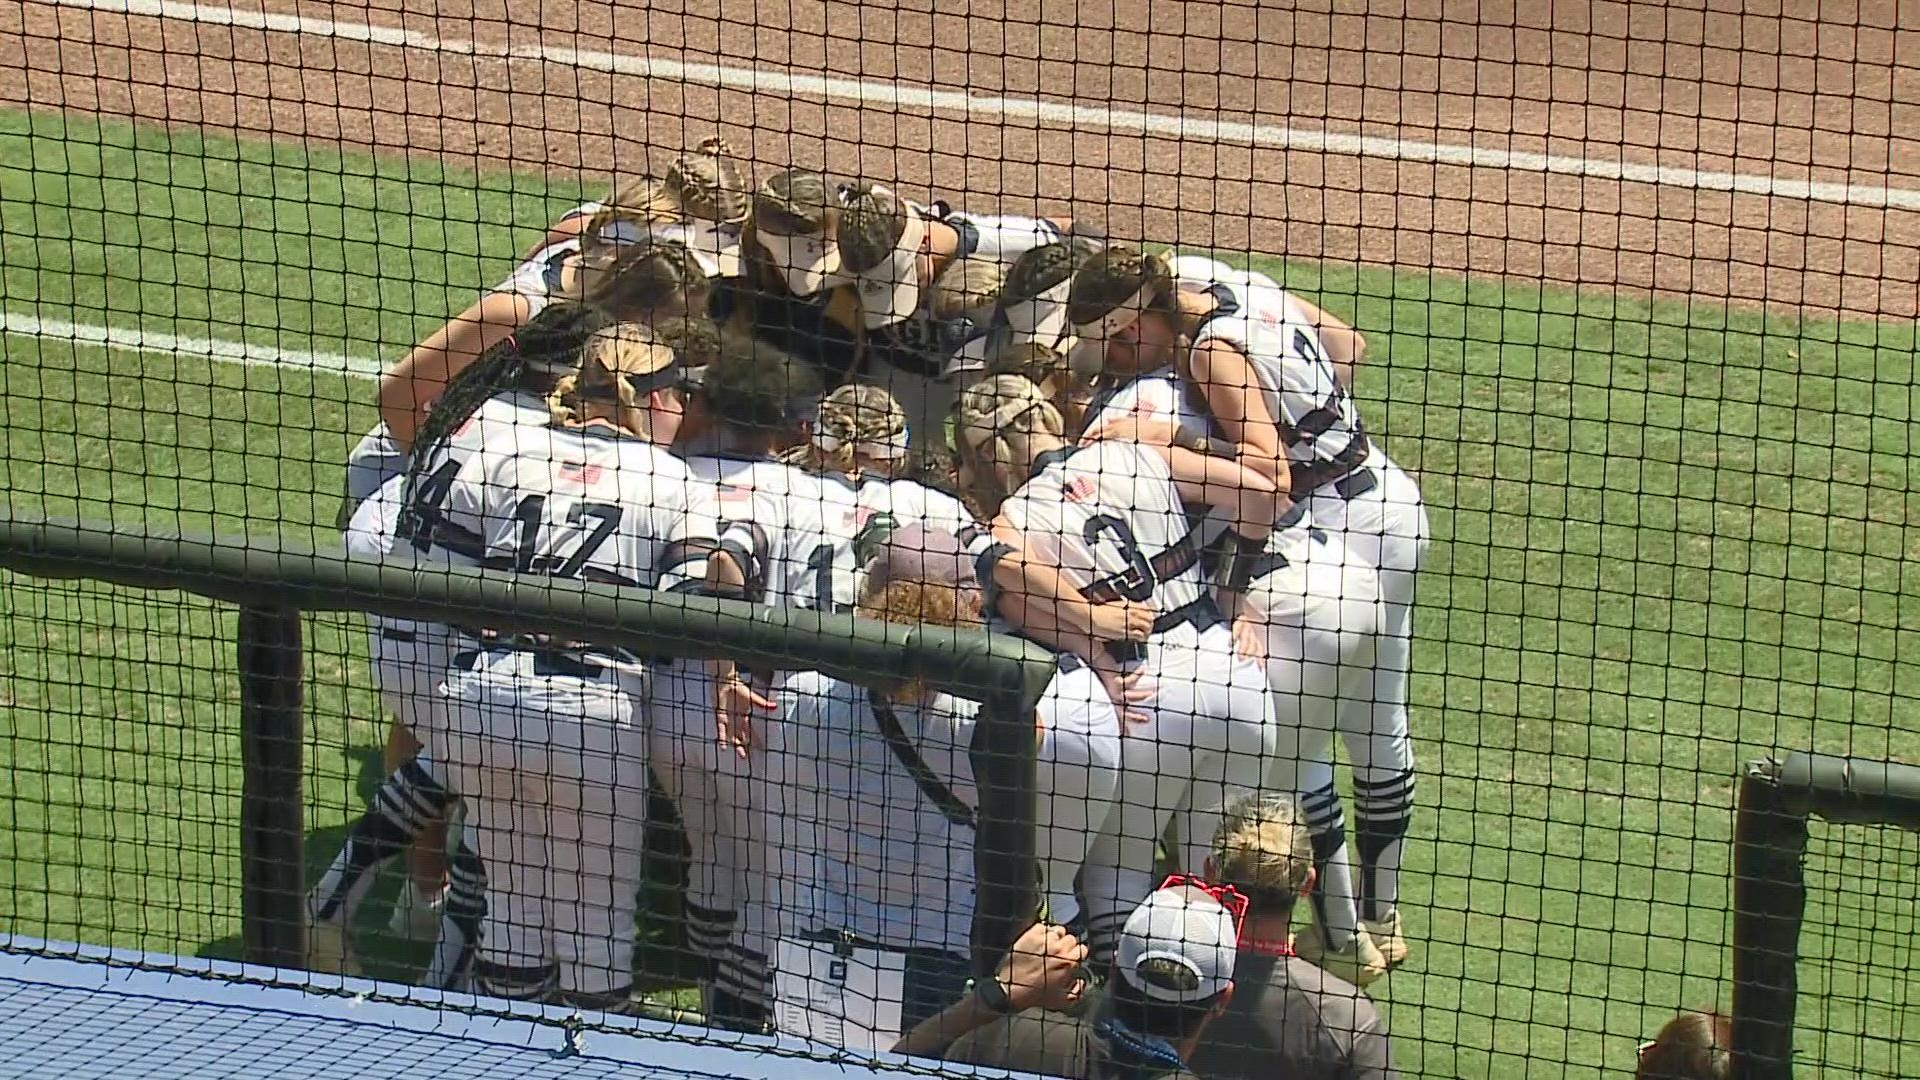 DH Conley won both games today and won the 4A State Championship Series 2-1.